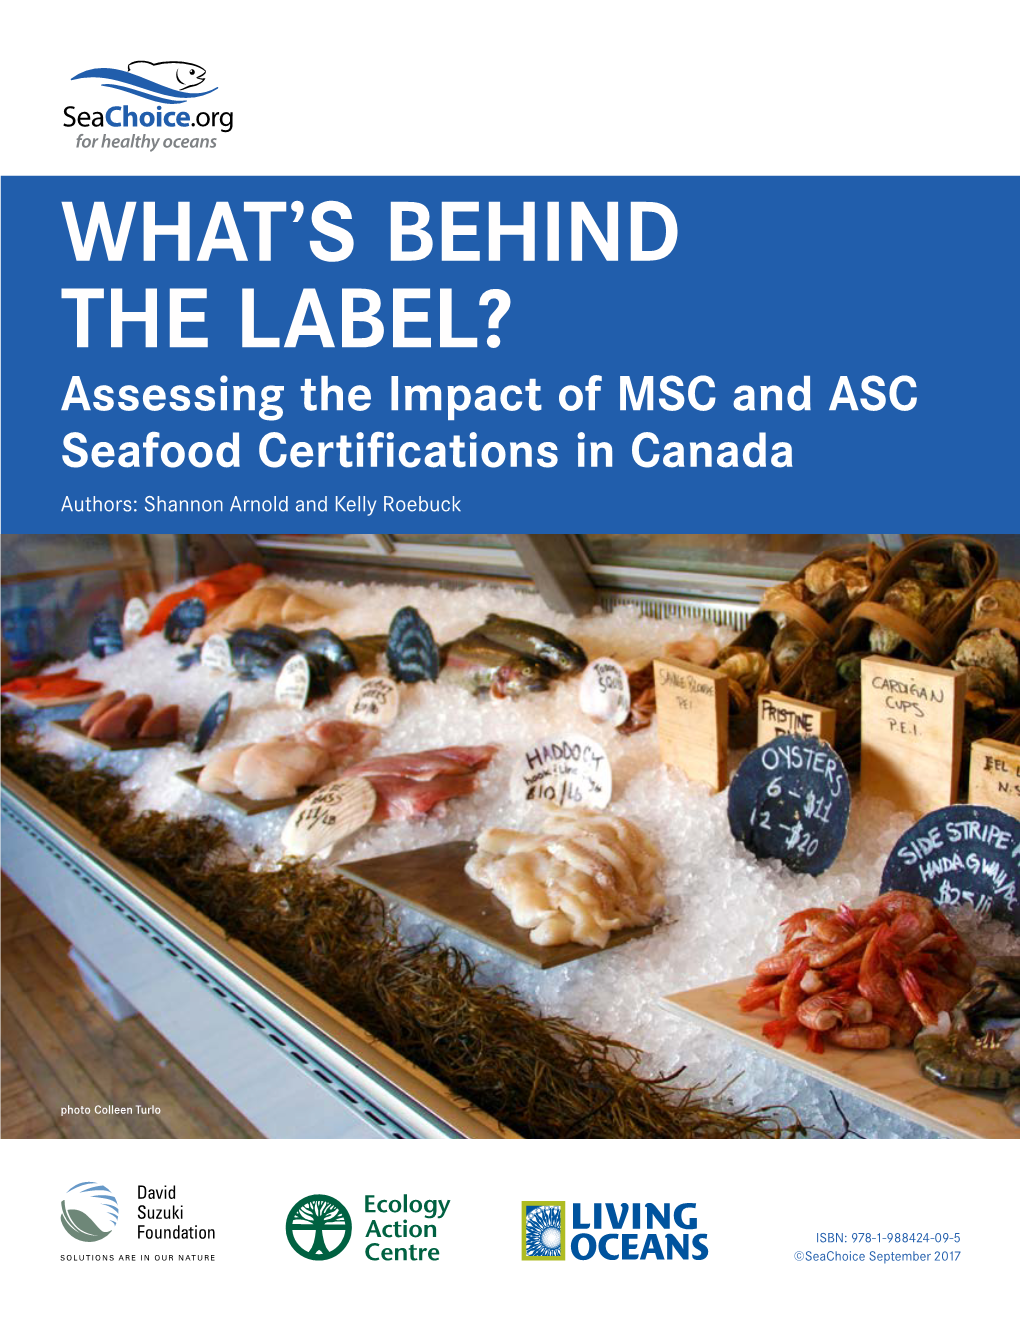 What's Behind the Label? Assessing the Impact of MSC and ASC